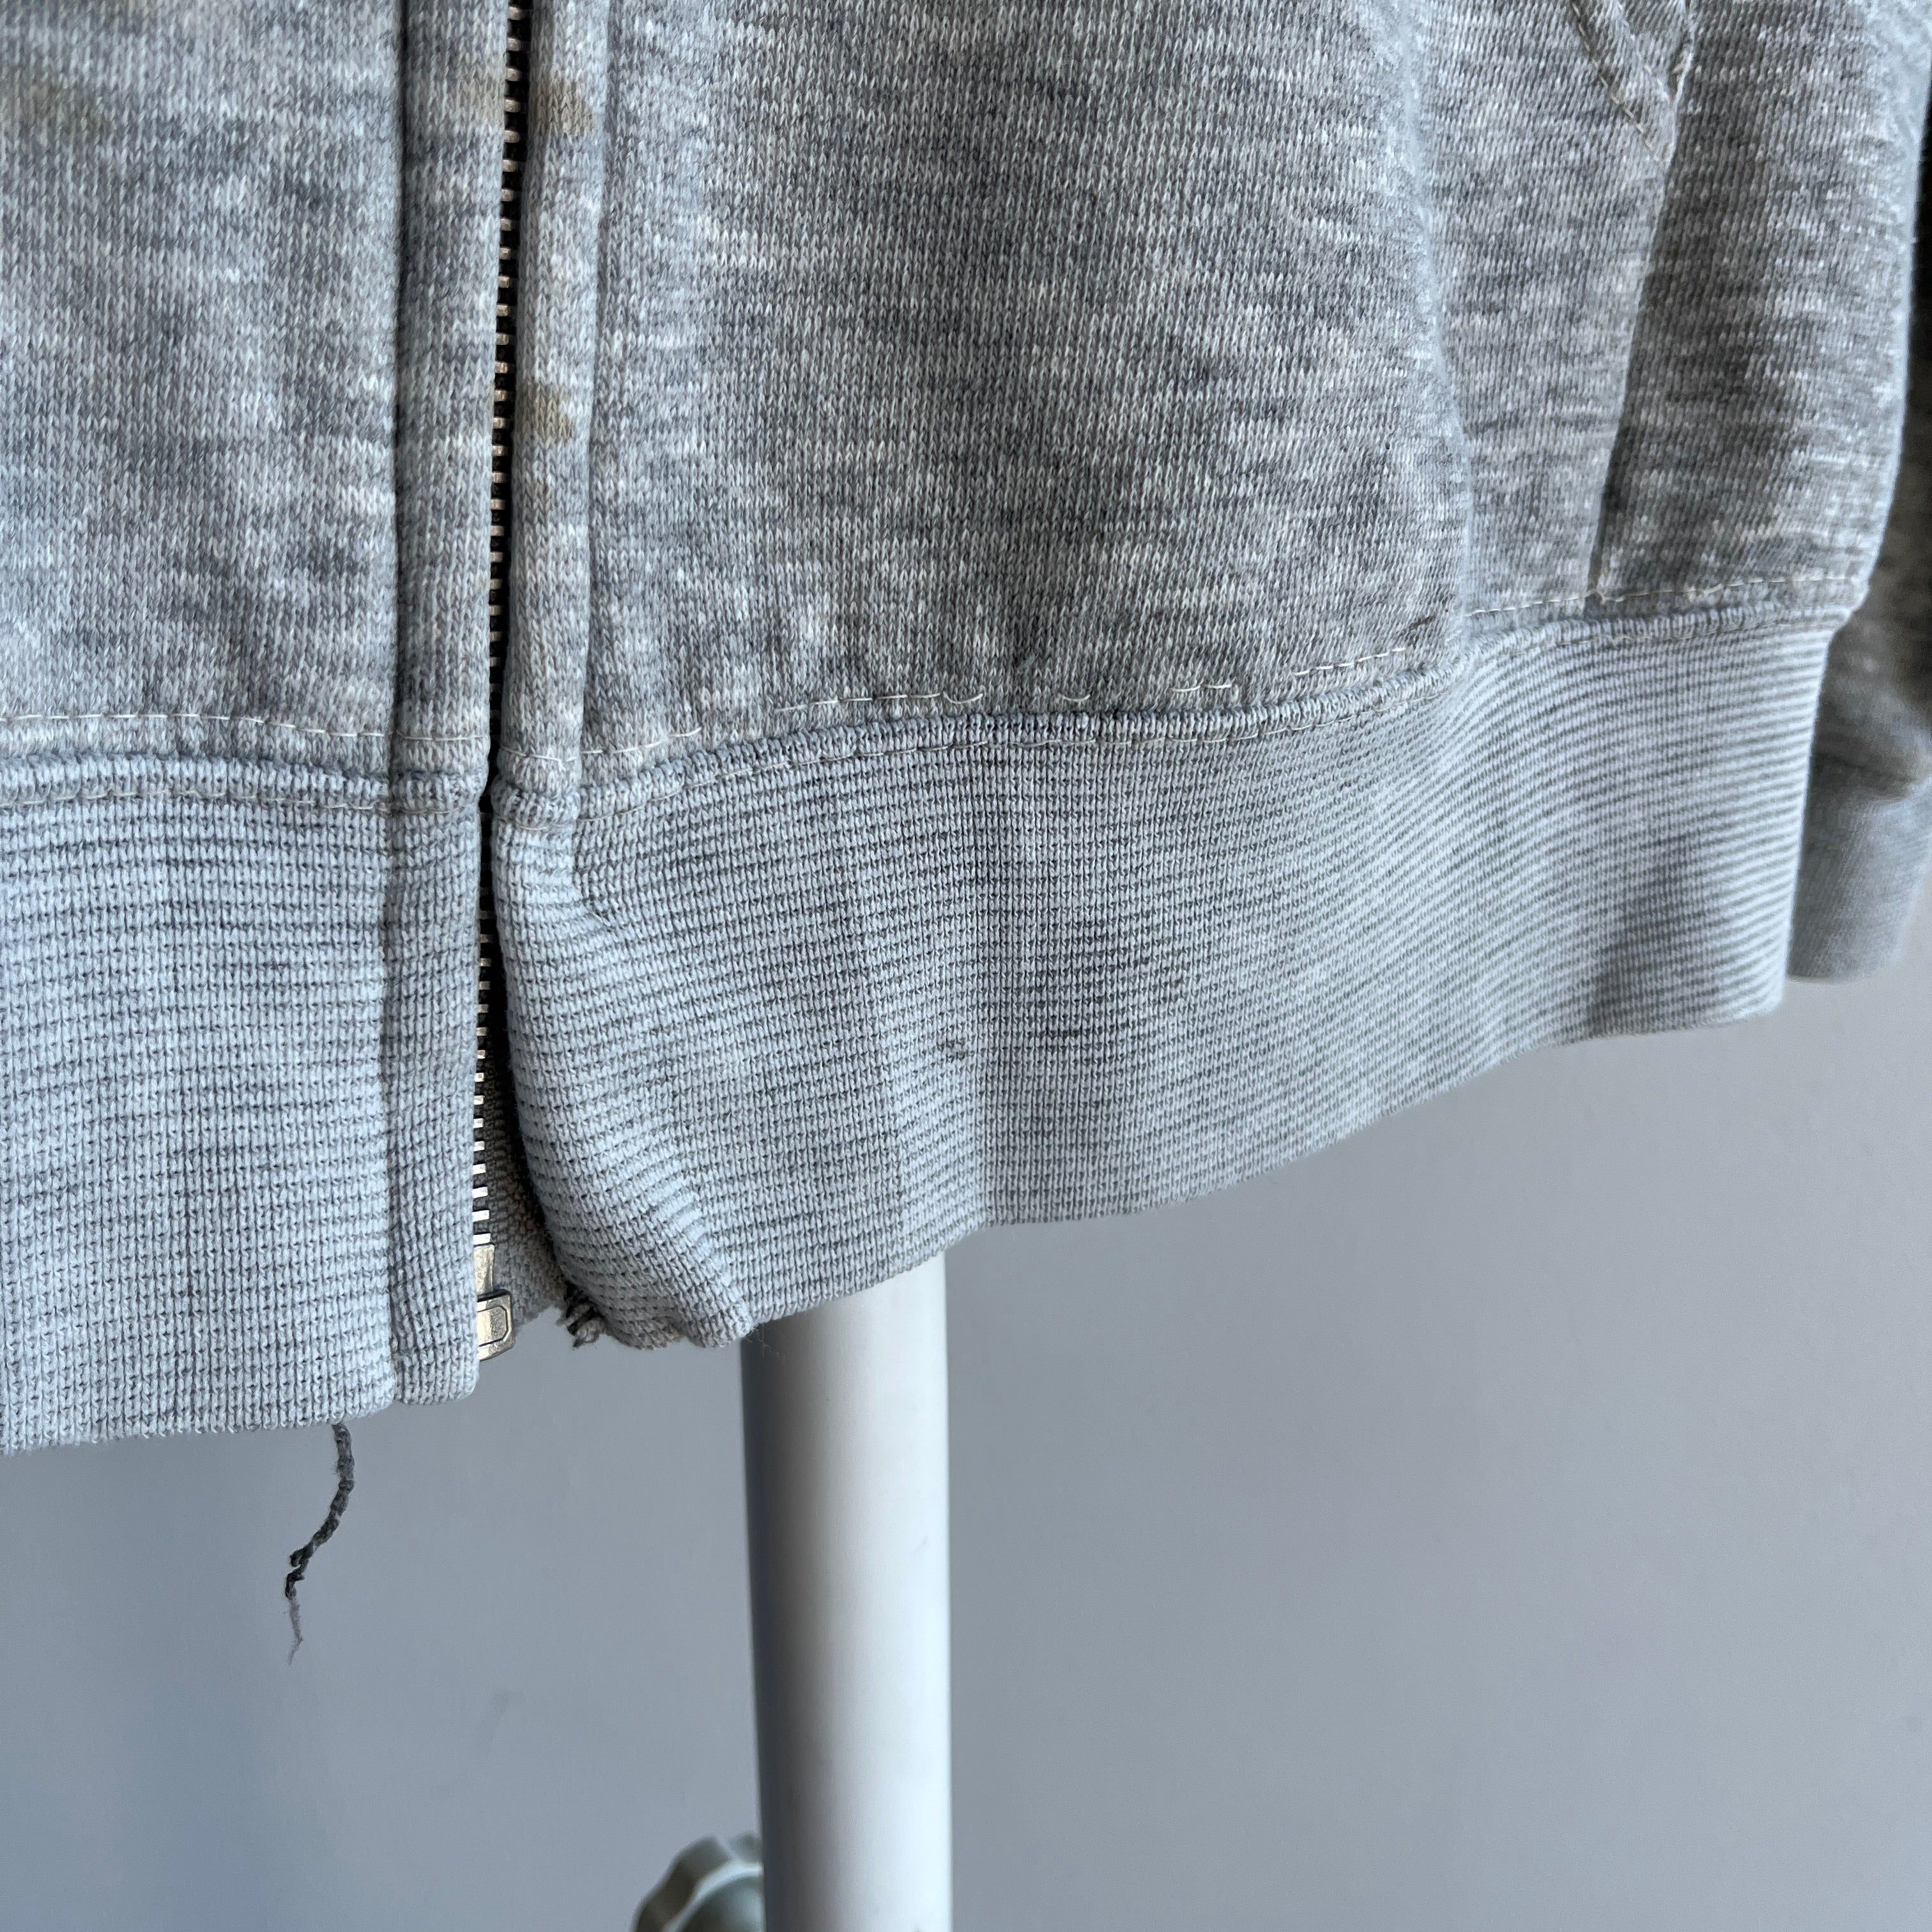 1980s Thin Gray Zip Up Hoodie with Light Staining - Including Paint